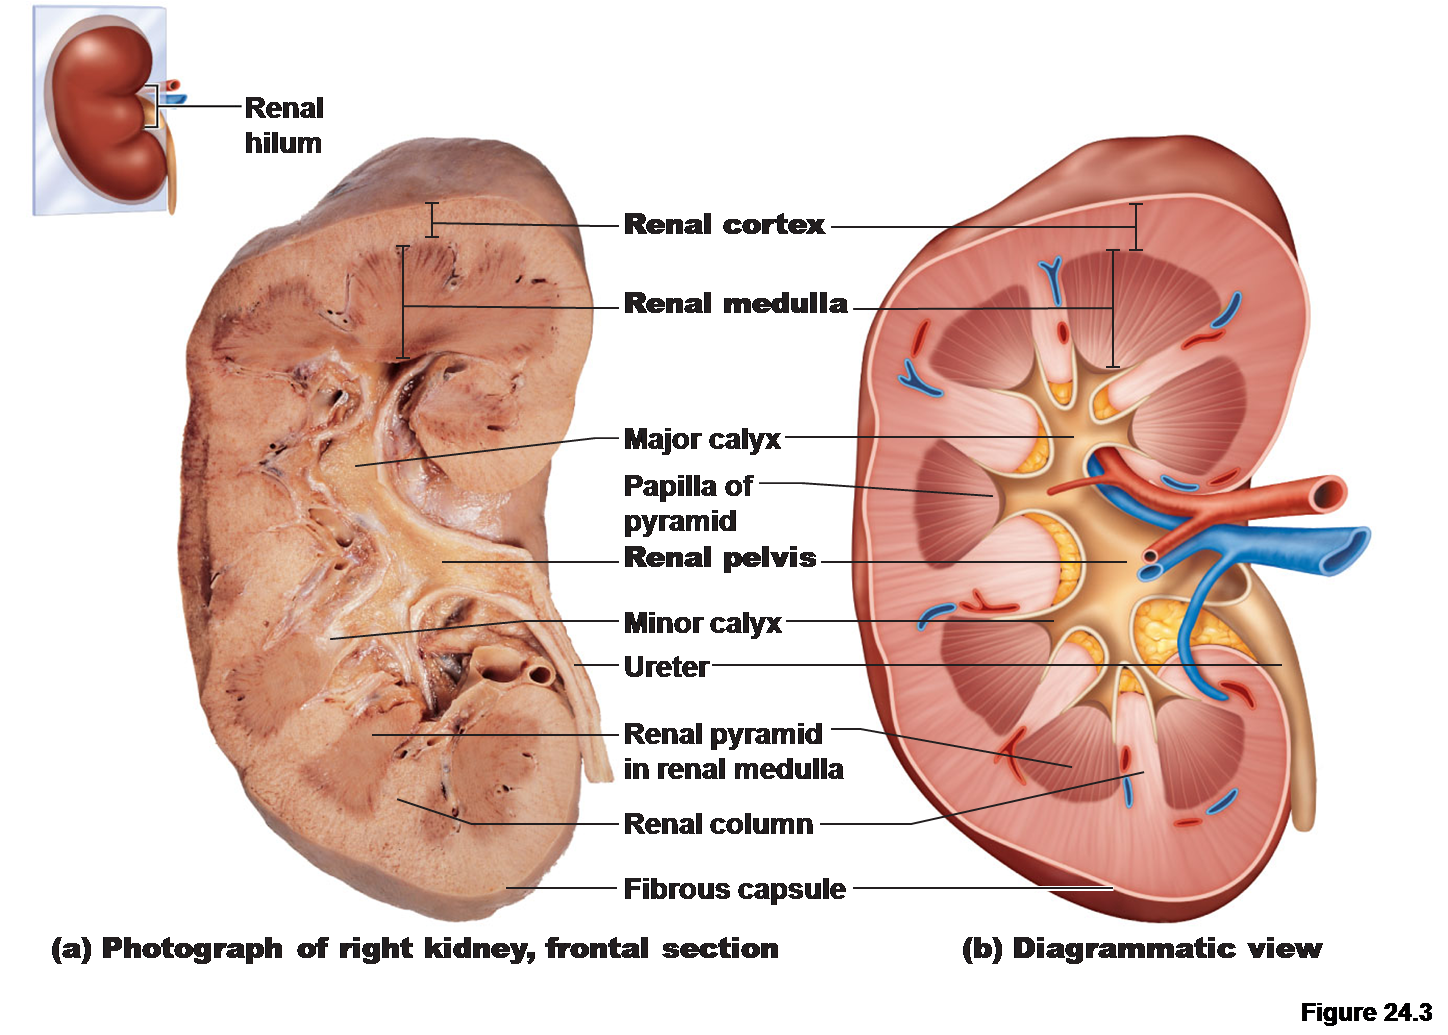 <p>✶Urine from all collecting ducts of all nephrons</p><p>✶Empties into the renal pelvis</p><p>✶Urine enters the ureter</p>